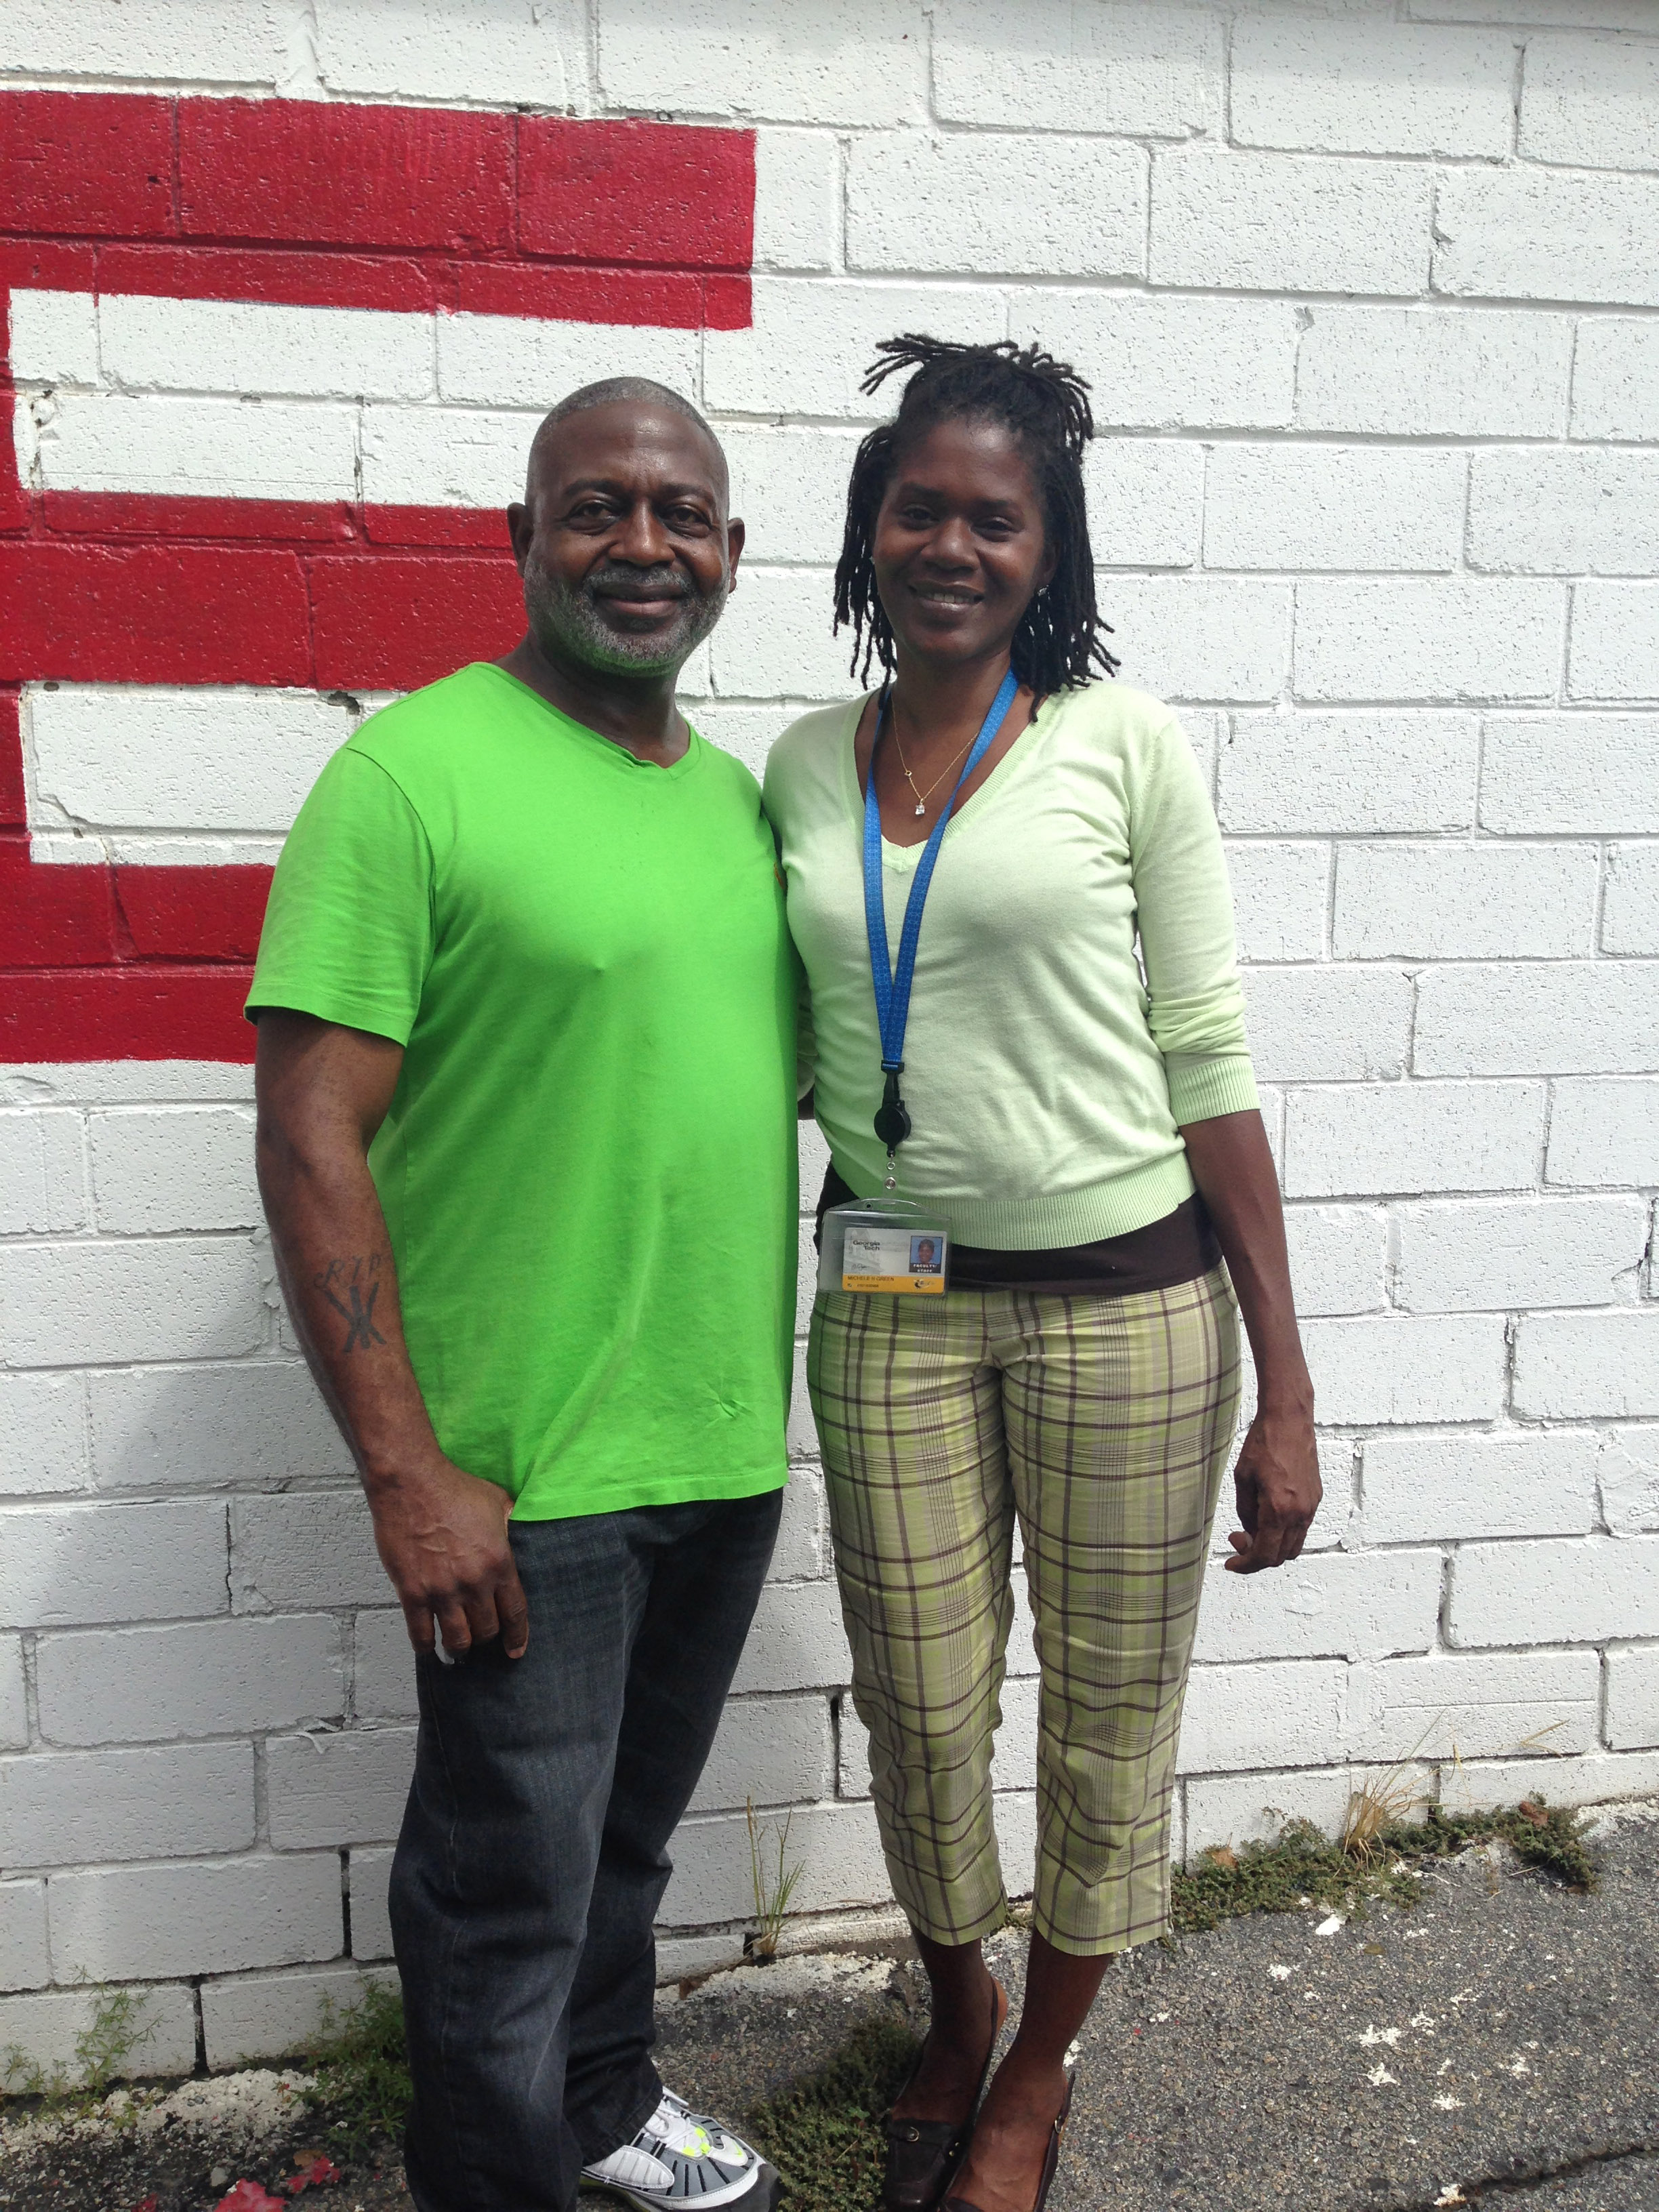 Michele Green, administrative professional for the Georgia Tech Research Corporation, found assistance through the Atlanta Step-Up Society when she was in need. She poses with Robert Barber, the Society’s founder, at the Step-Up thrift store on Monroe Drive in Midtown.